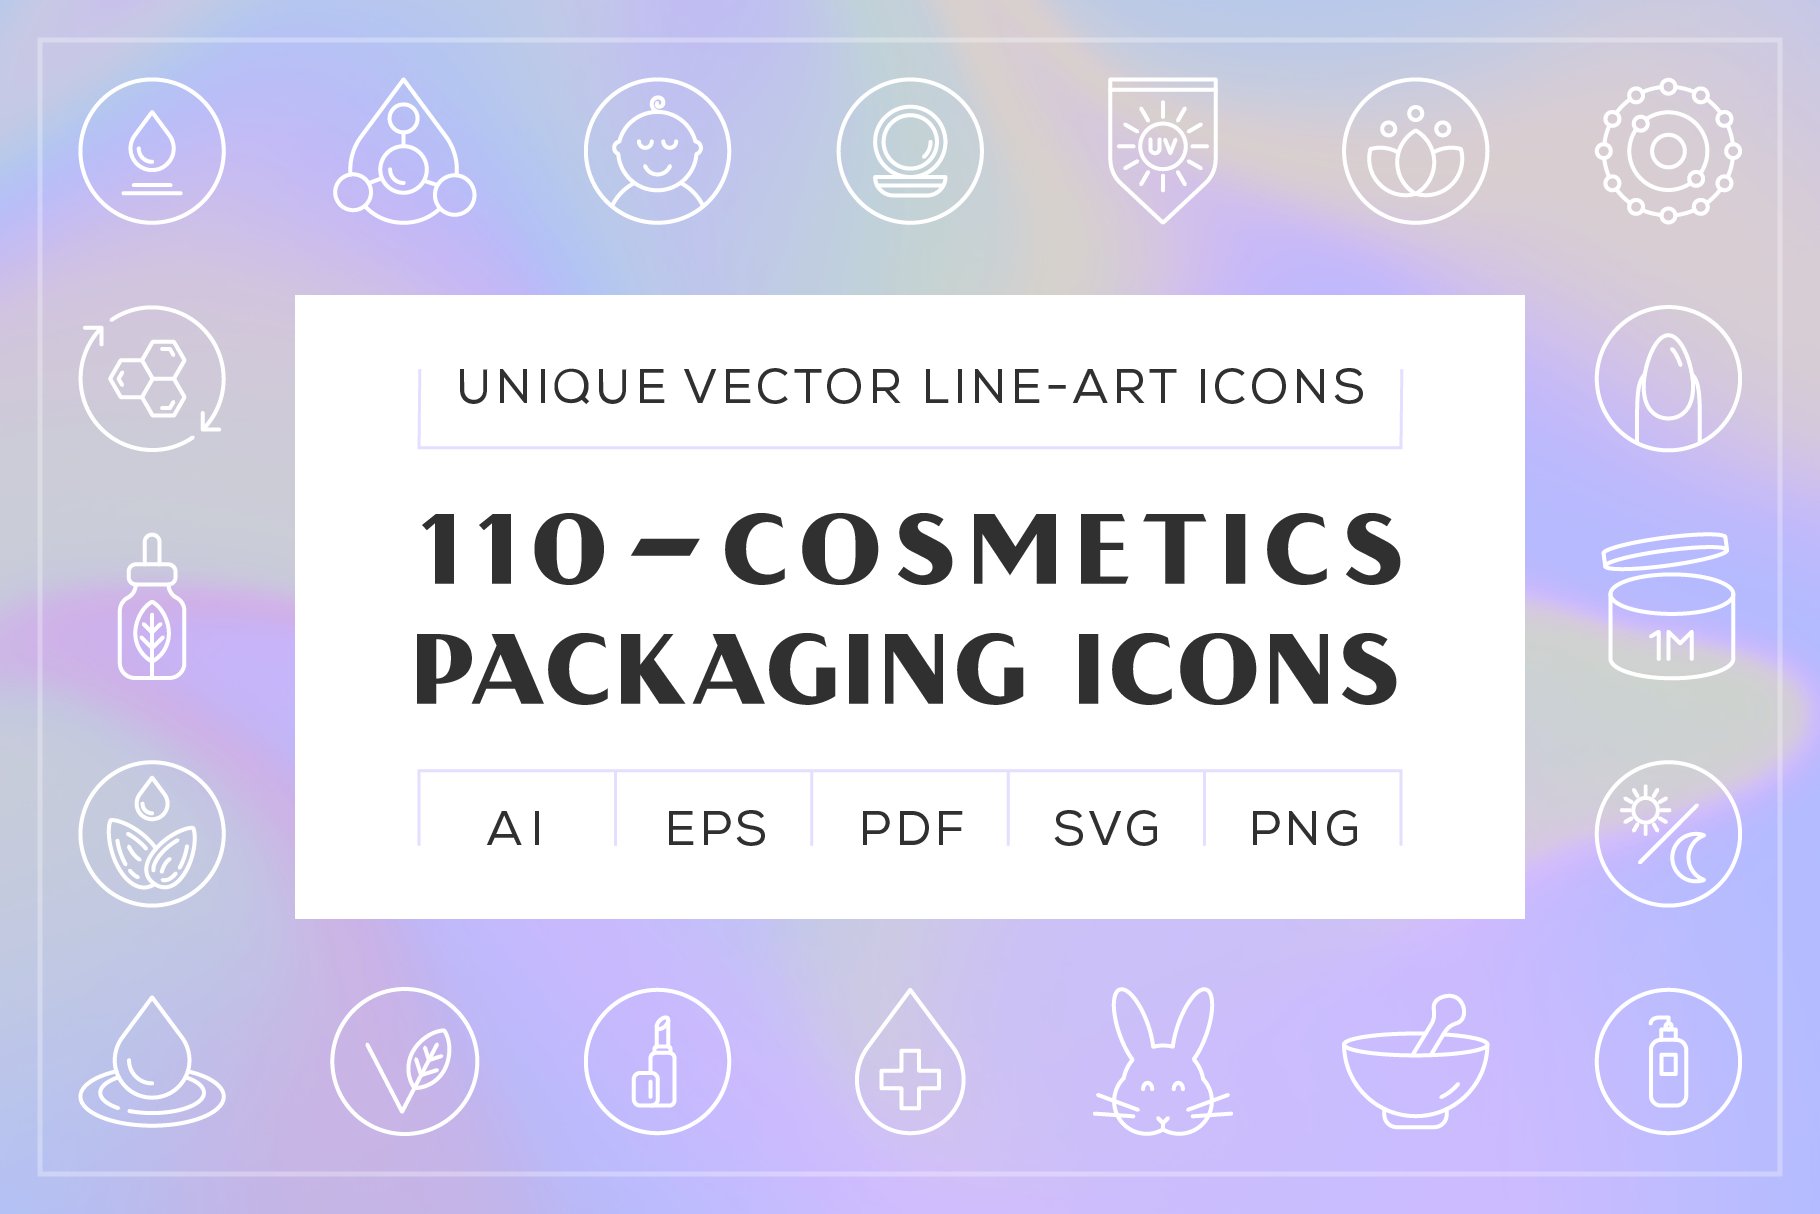 Cosmetics Packaging Icons cover image.